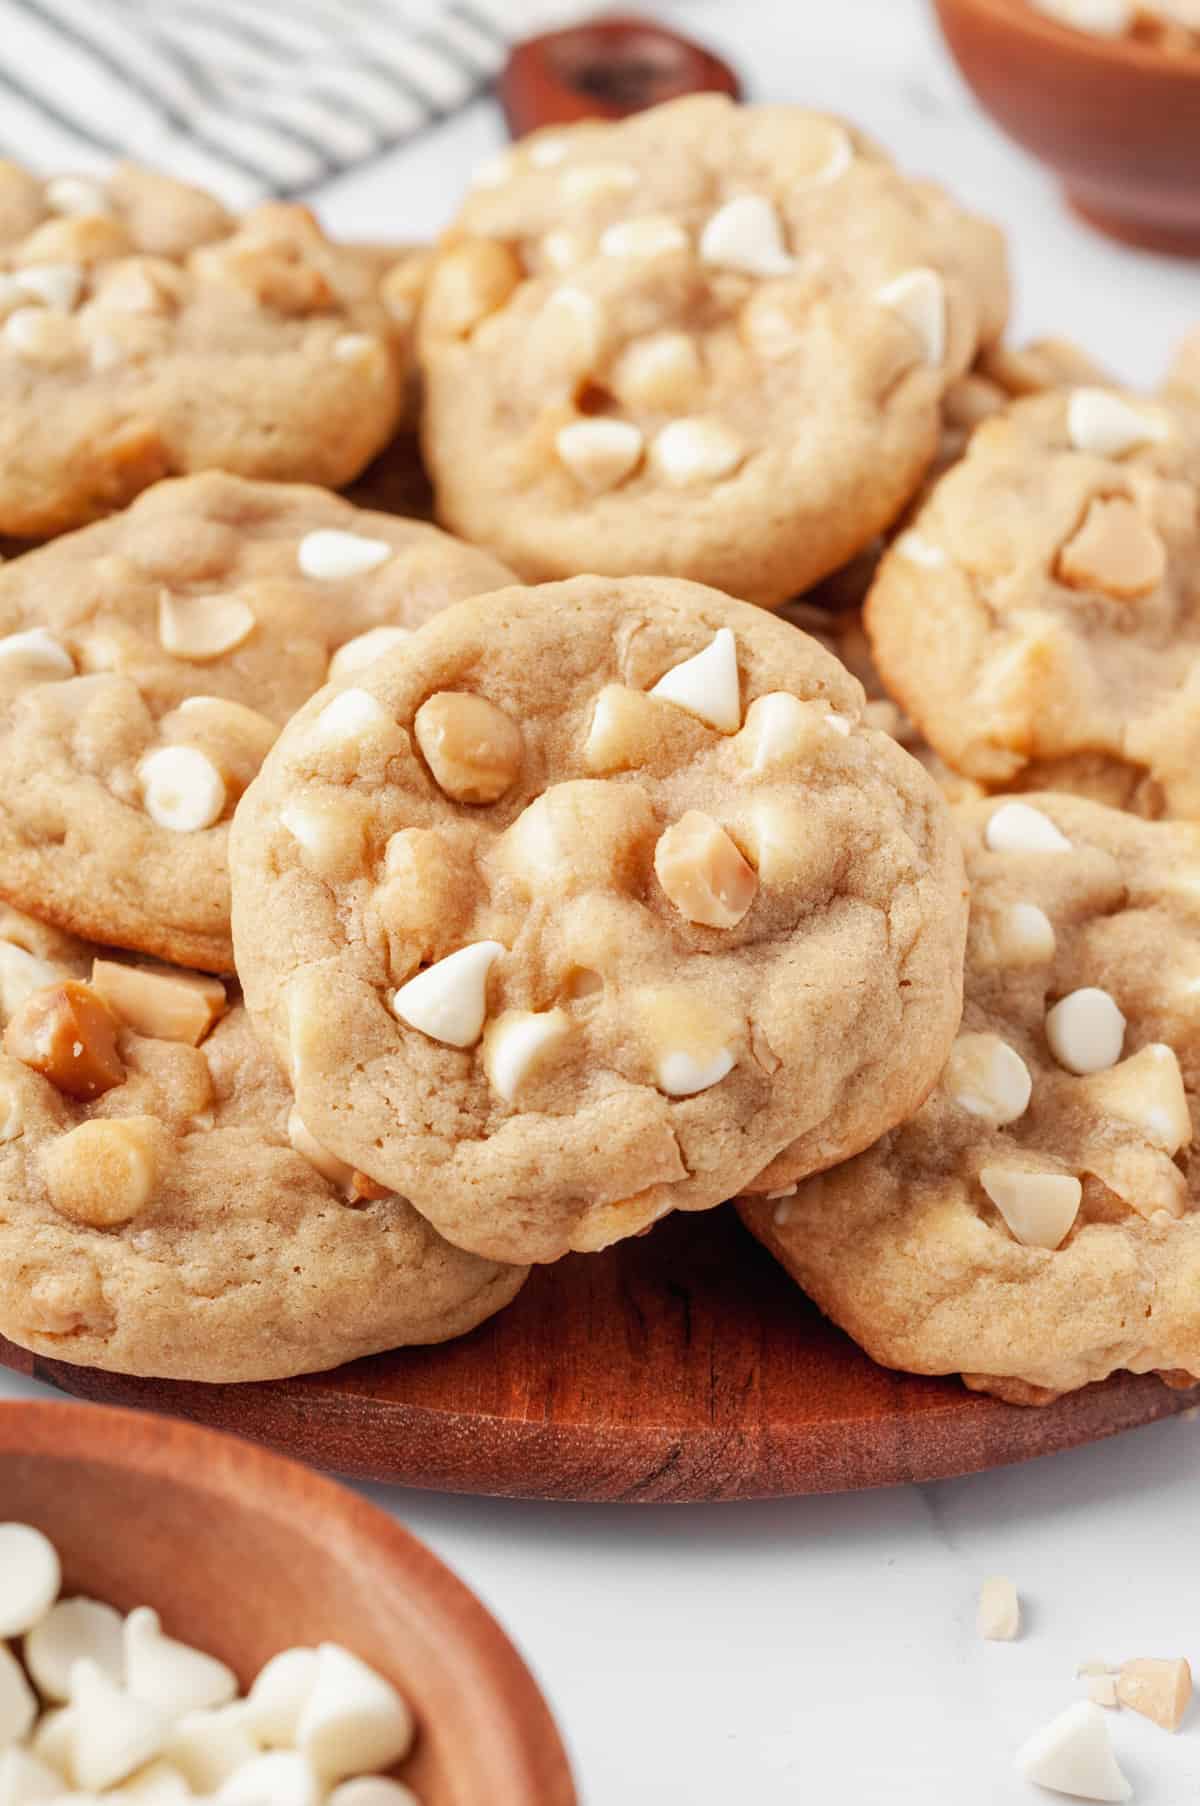 close up image of a pile of macadamia nut cookies served on a round wooden board